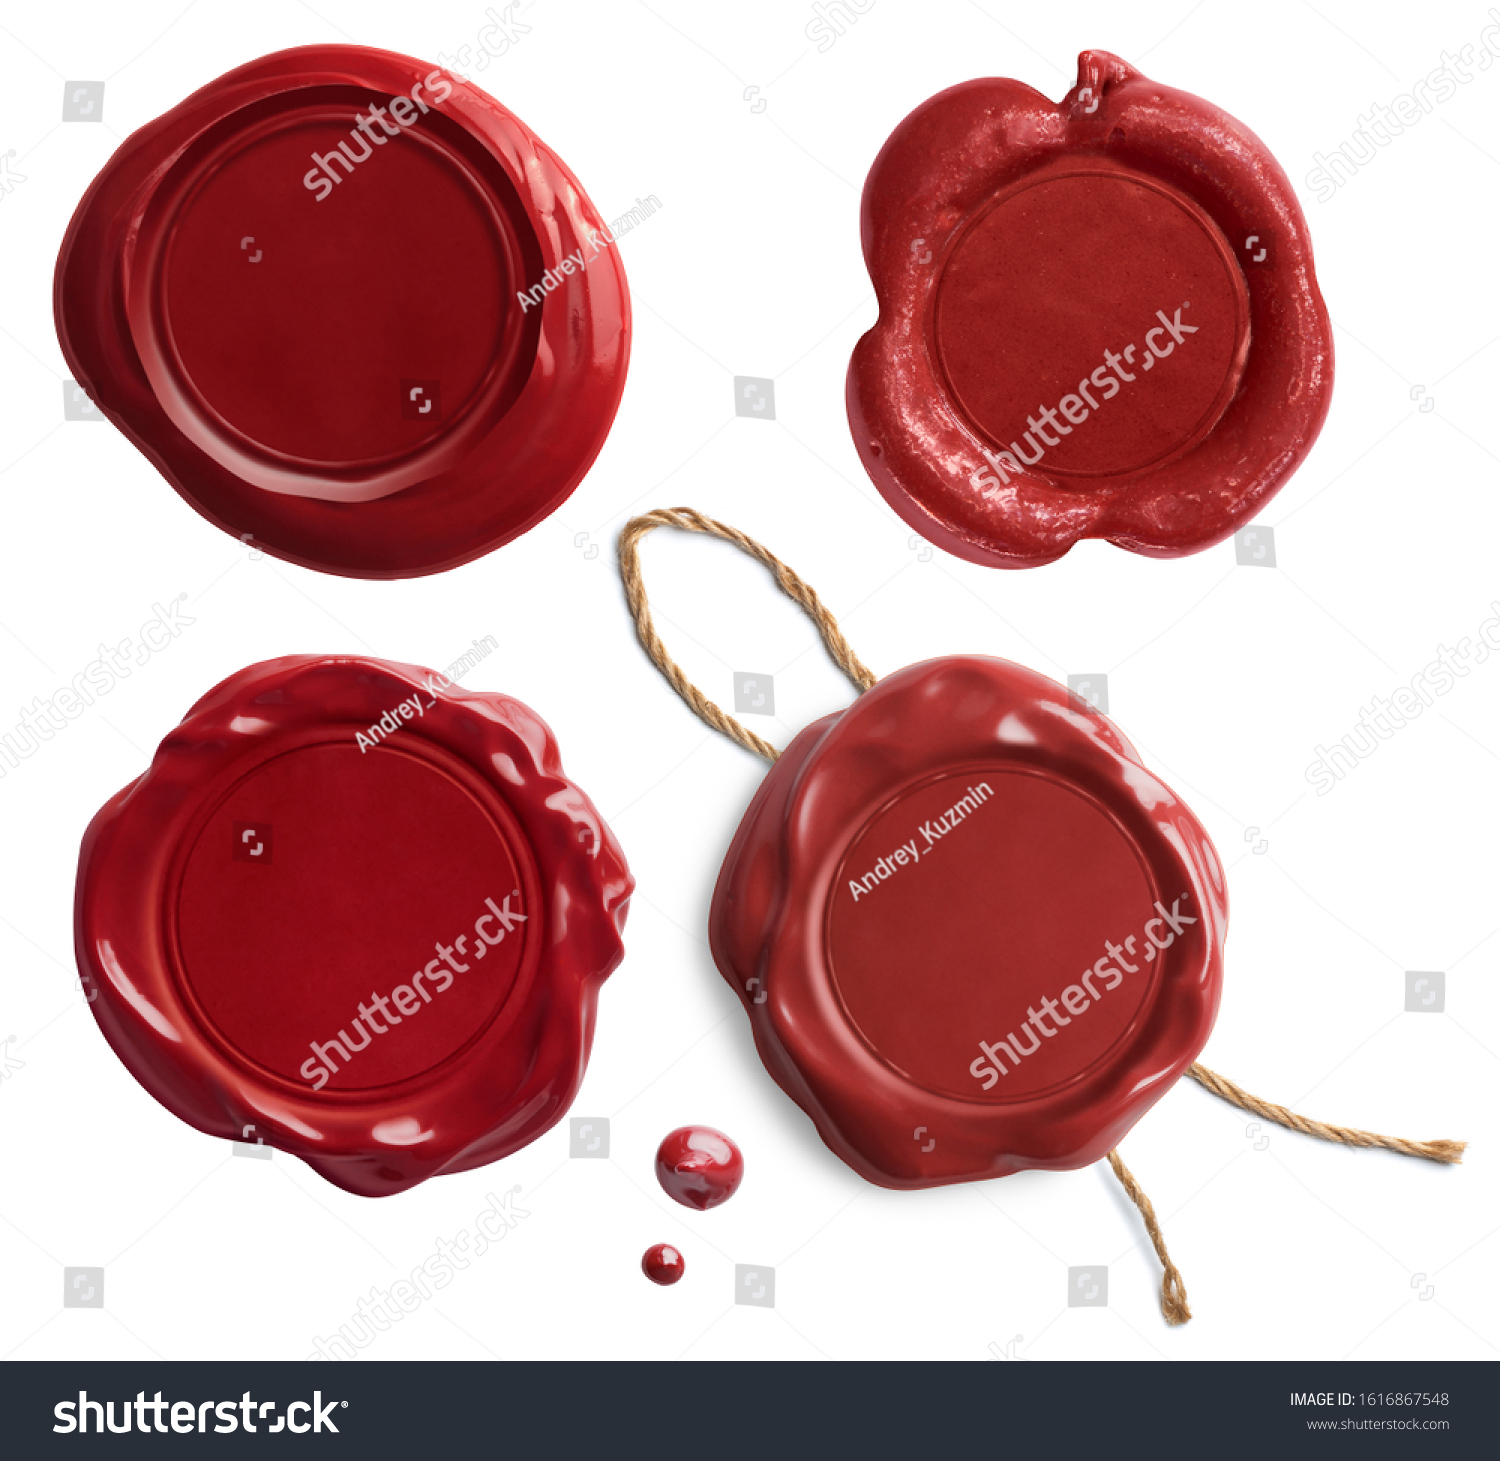 Old red wax seals or stamps set isolated on white #1616867548